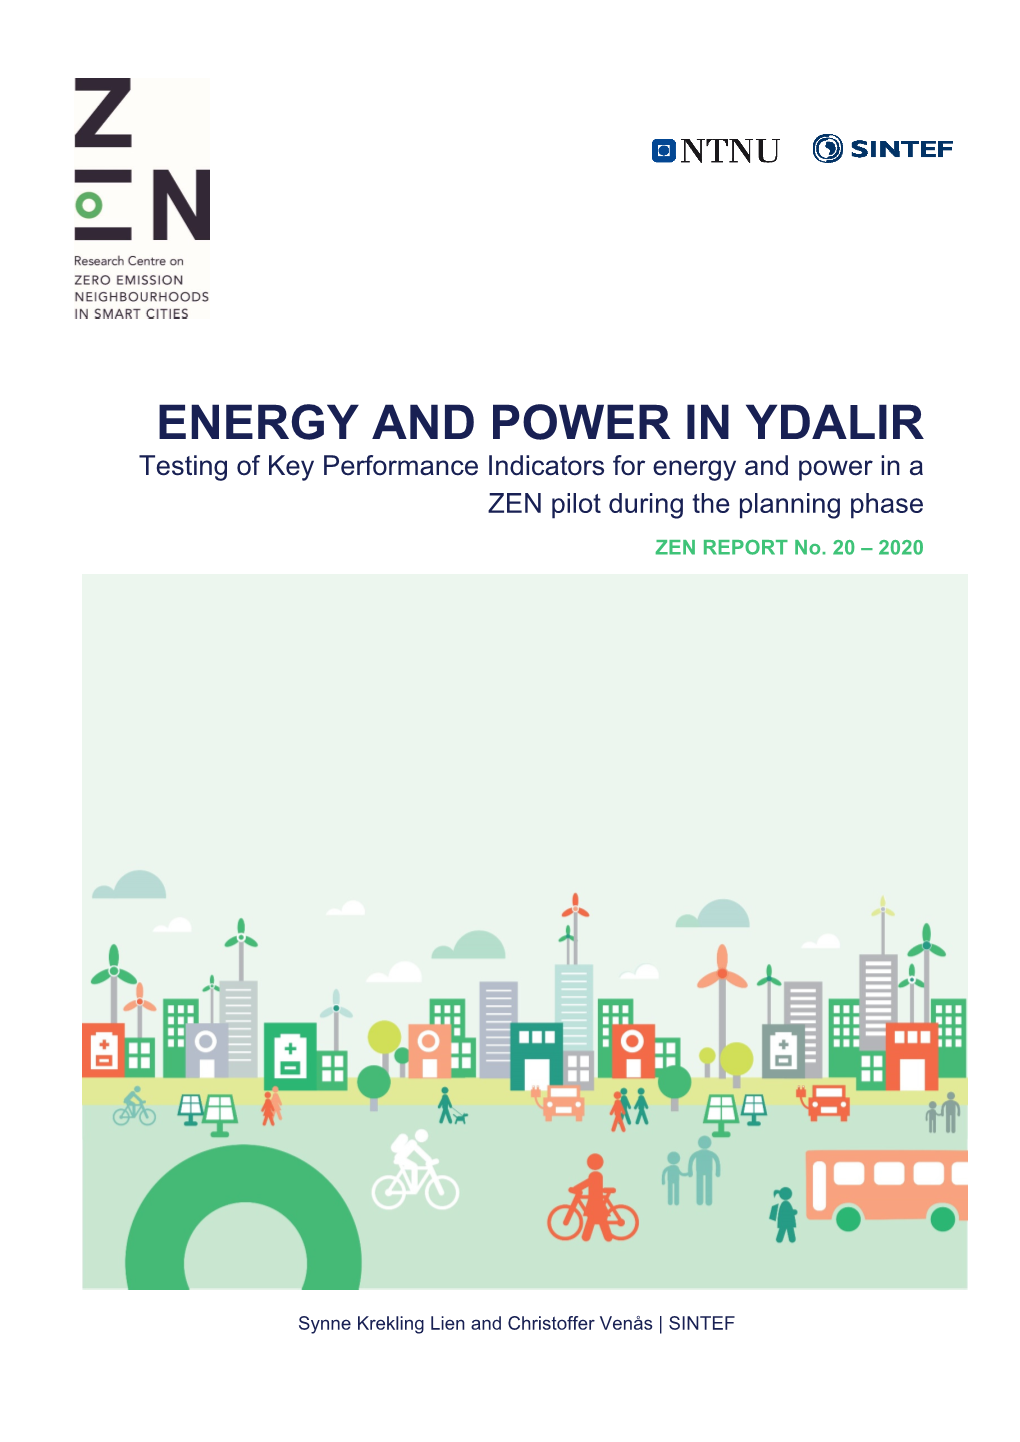 ENERGY and POWER in YDALIR Testing of Key Performance Indicators for Energy and Power in a ZEN Pilot During the Planning Phase ZEN REPORT No